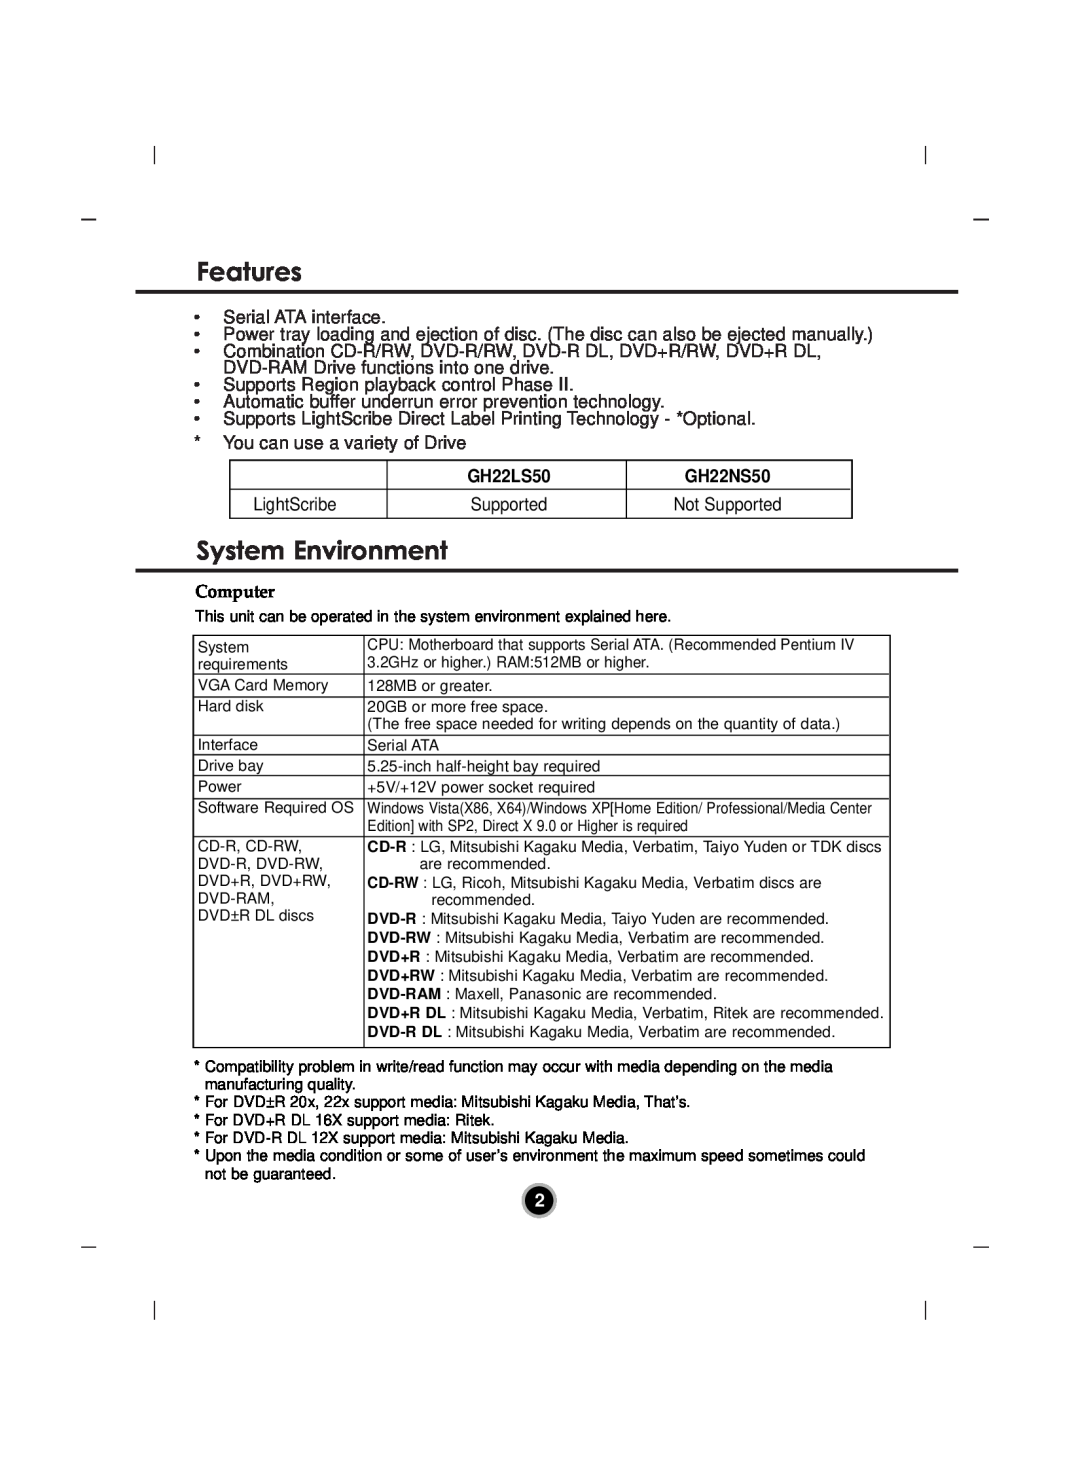 LG Electronics manual Features, System Environment, GH22LS50, GH22NS50, Computer 